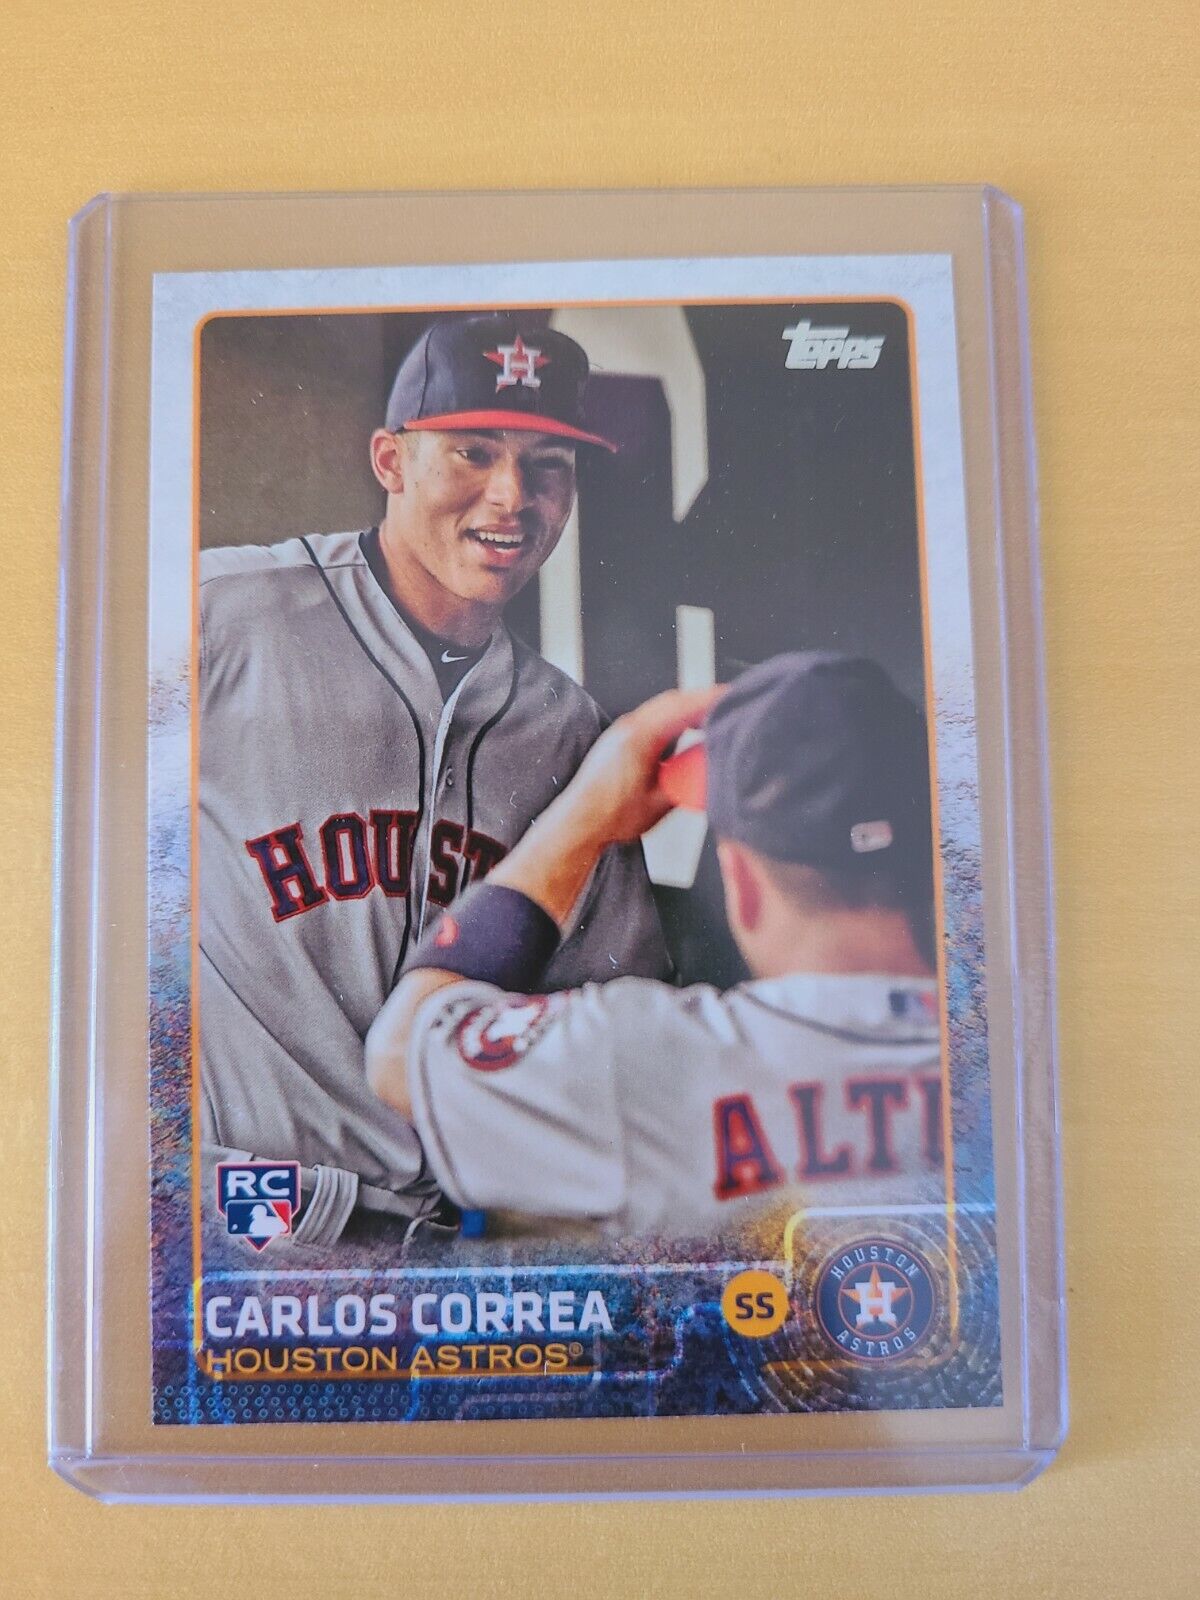 2015 Topps Update Carlos Correa Rc In Dugout Photo Variation Astros